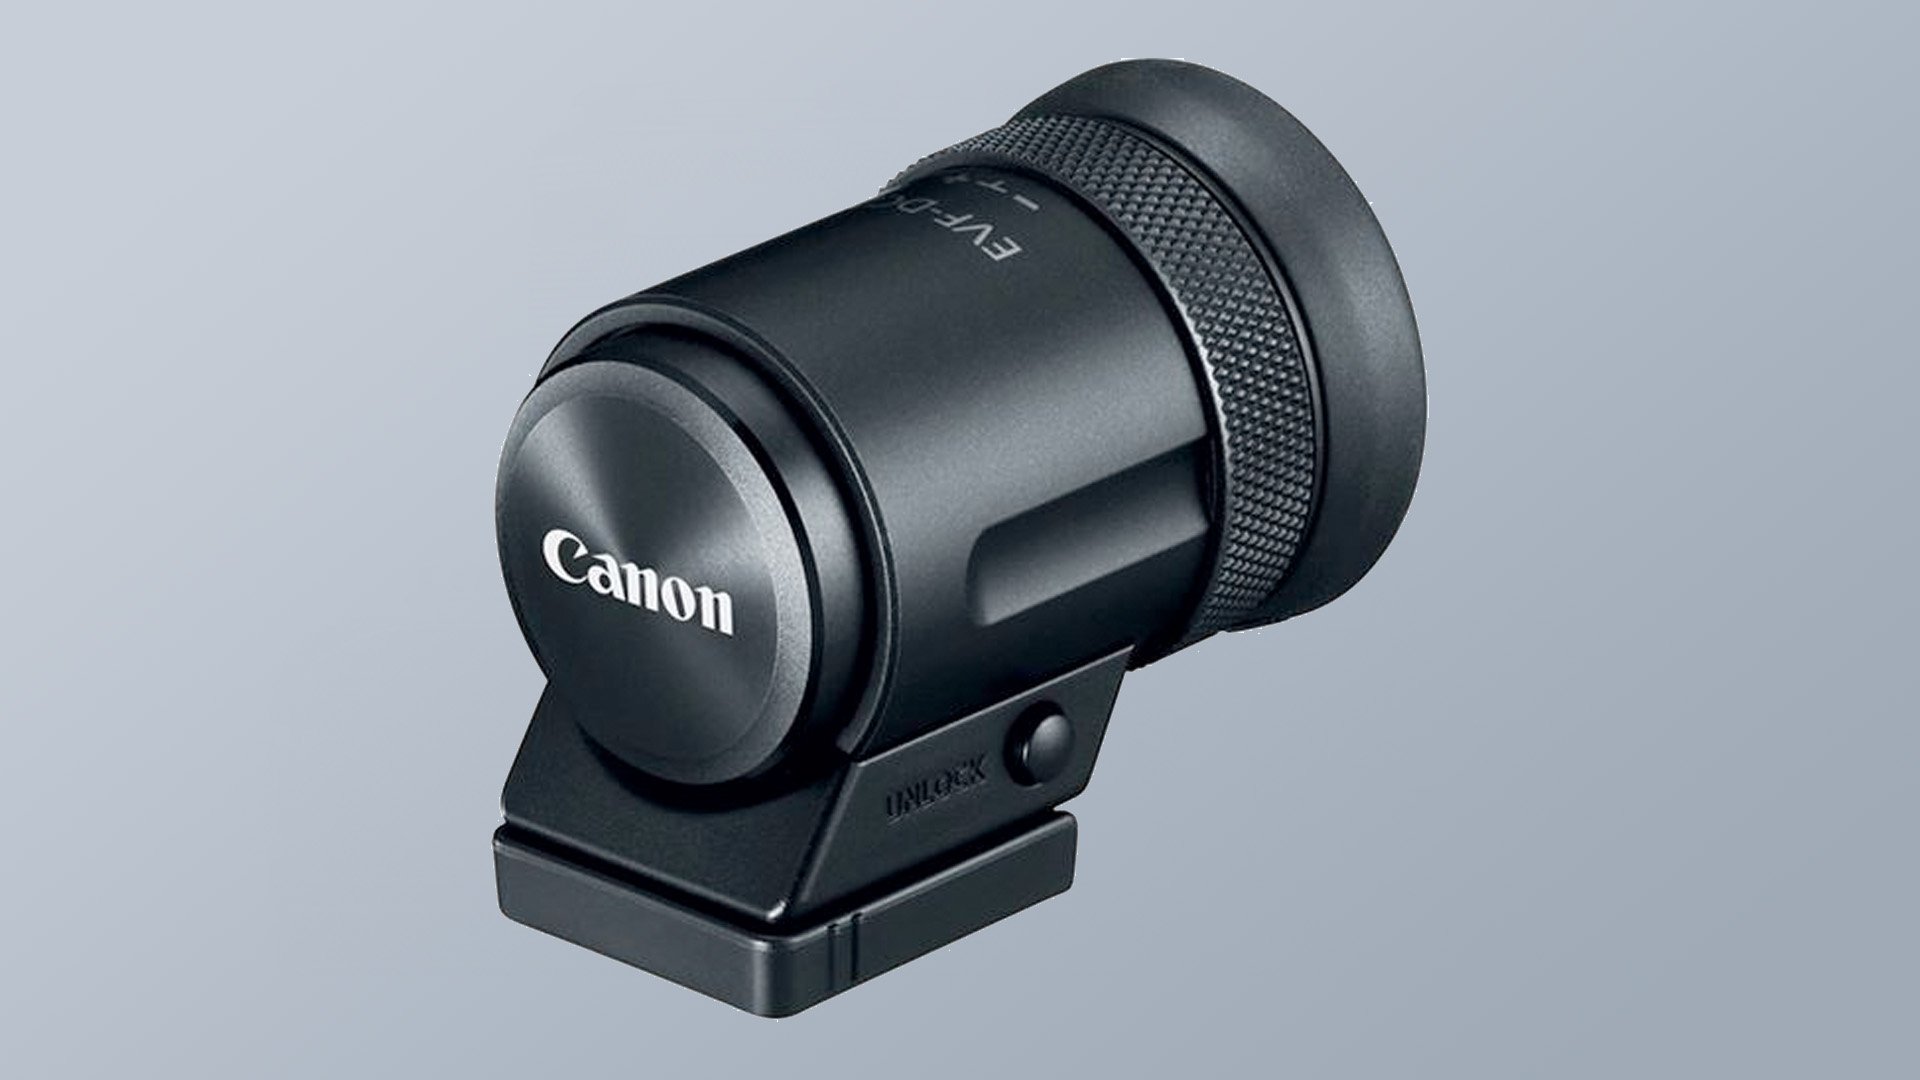 A simulated image of the alleged Canon EOS R100 mirrorless camera